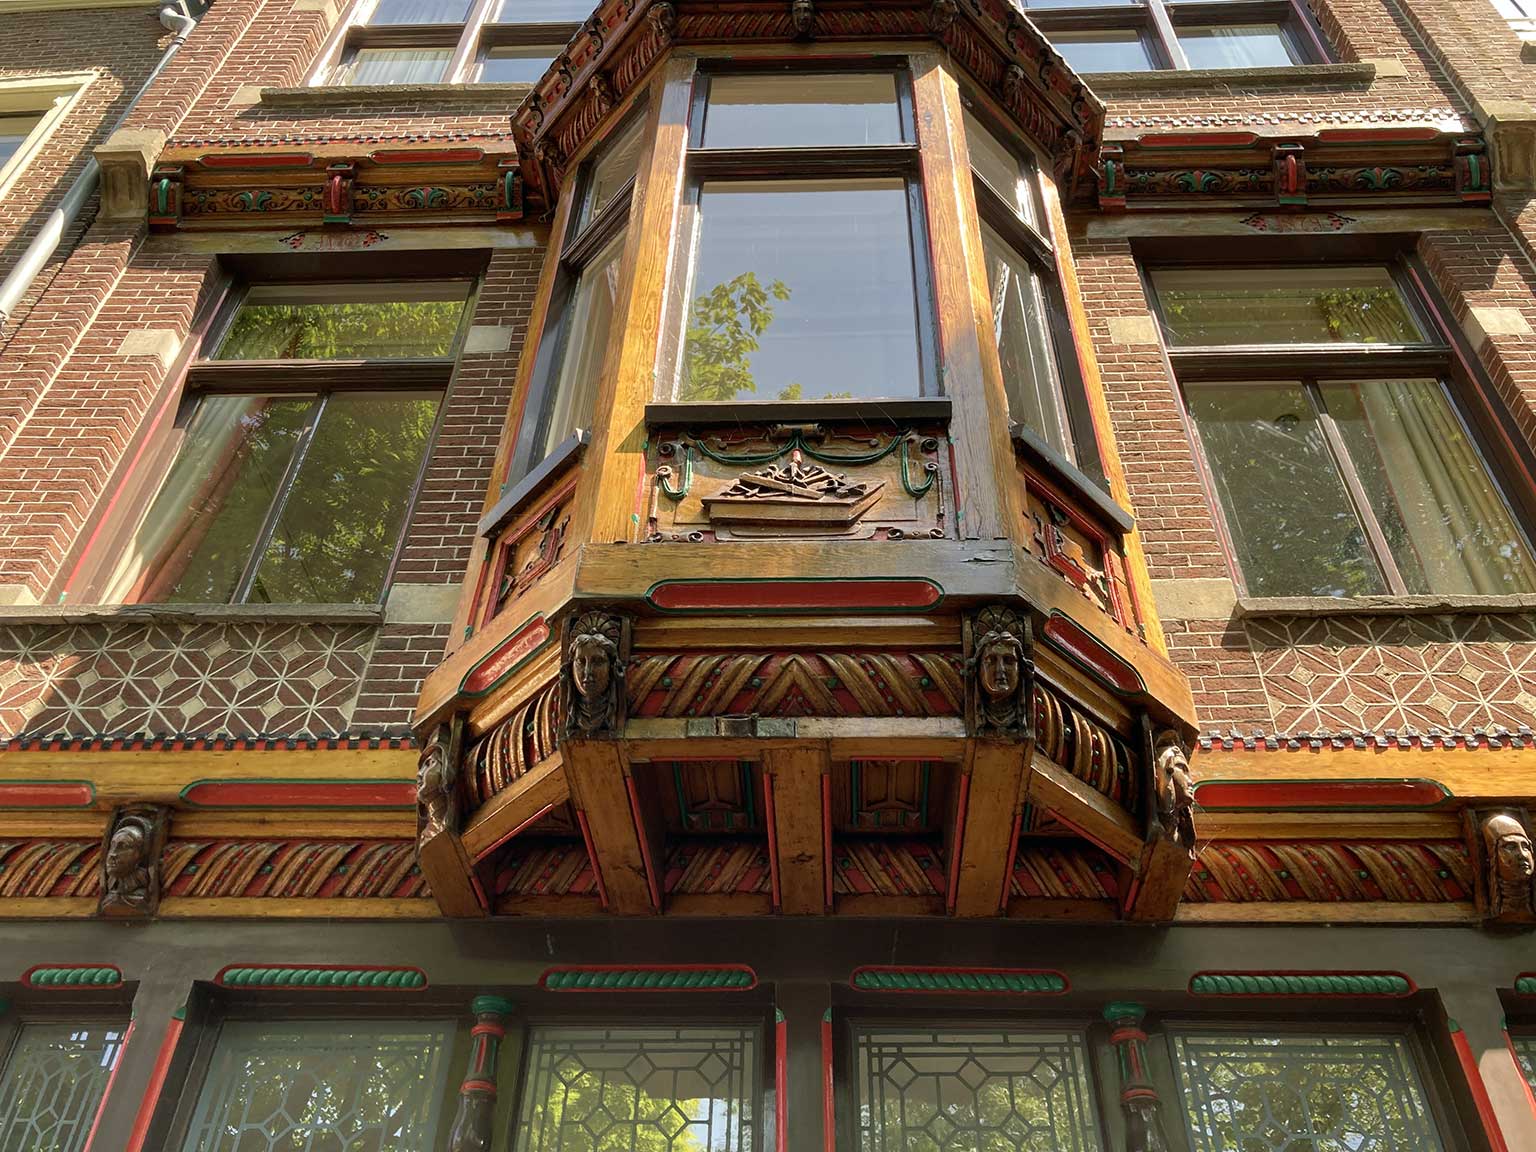 Detail of the woodwork, brickwork and stained glass windows on Reguliersgracht 57-59, Amsterdam